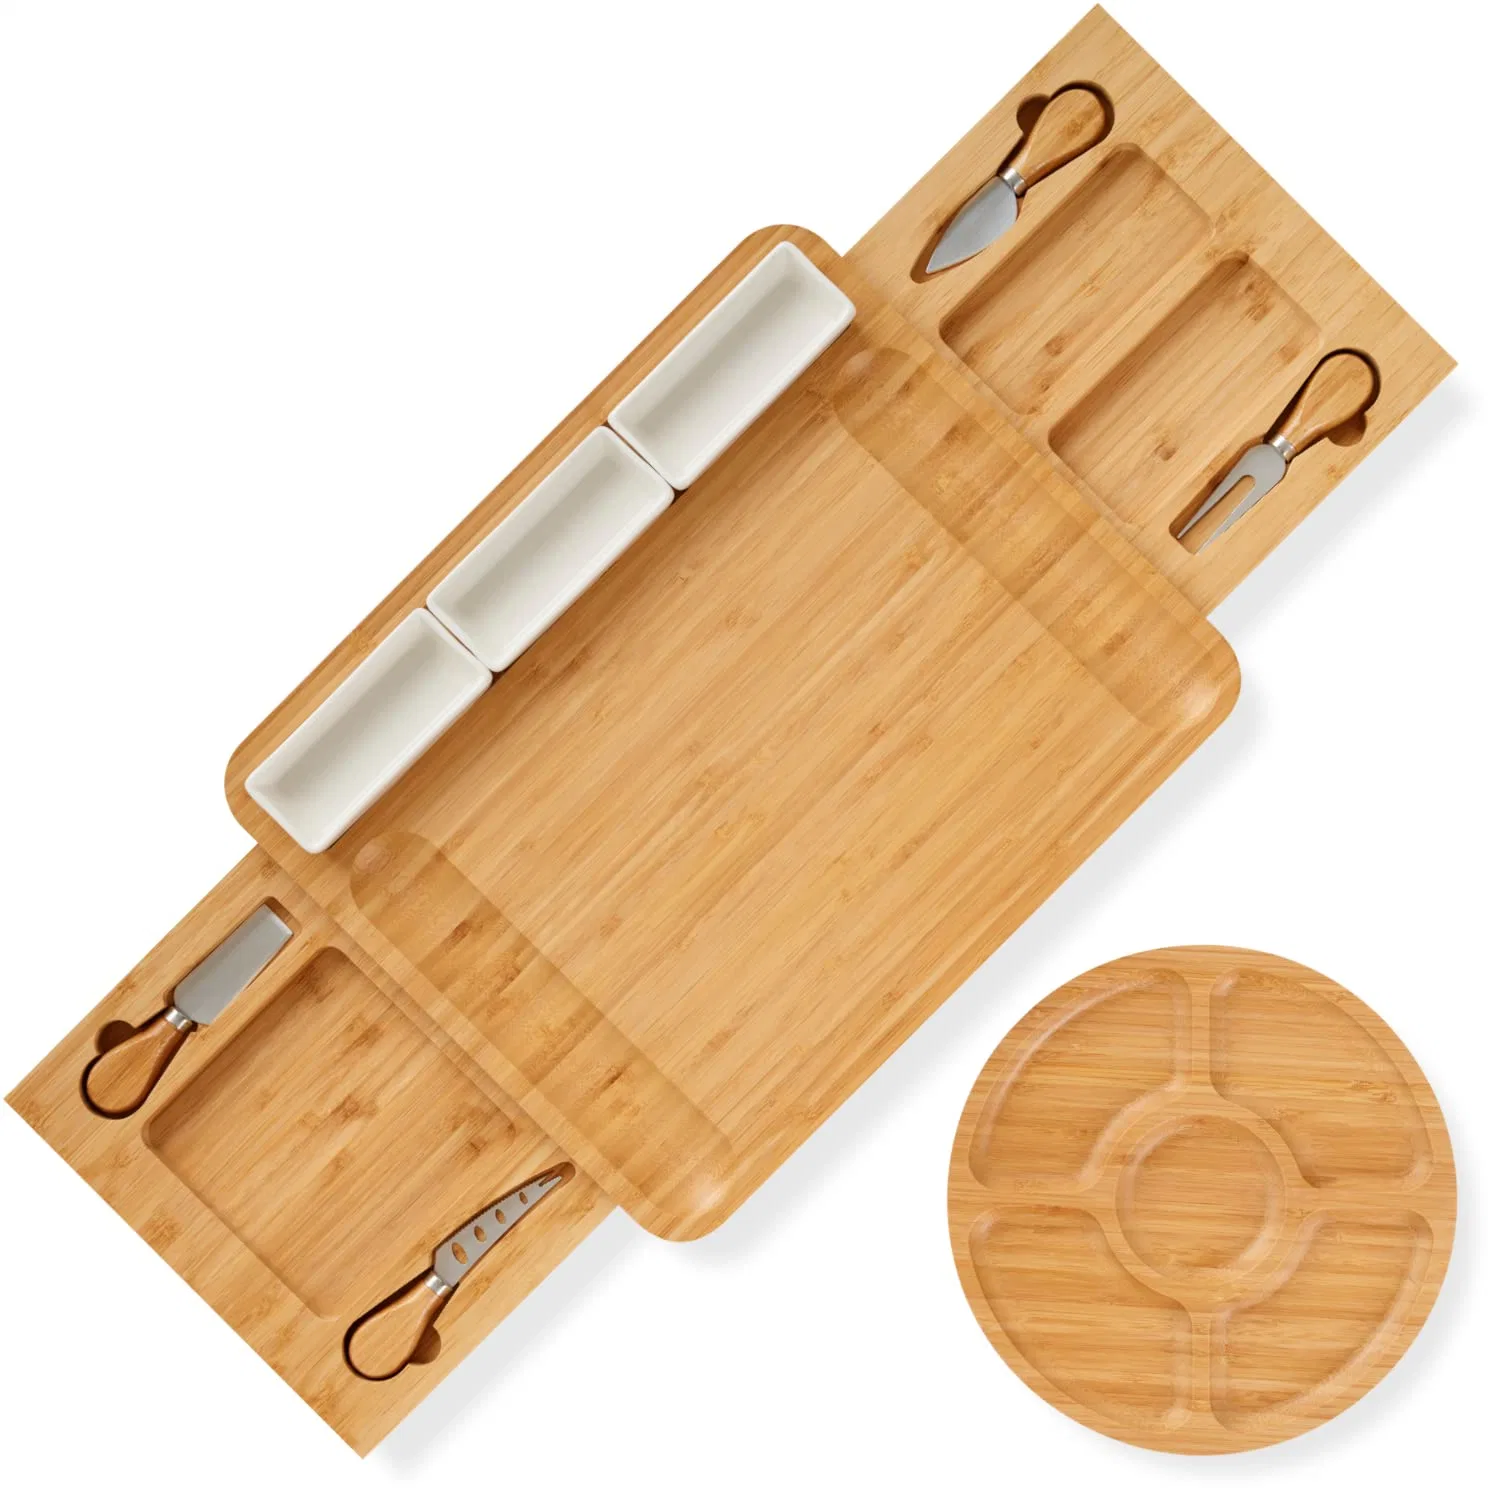 Charcuterie Board, Cheese Board, Ceramic Bowls & Knife Set, Extra Large Bamboo Platter for Serving Cheese, Meat - Gift for Men, Women, Couples, Anniversa